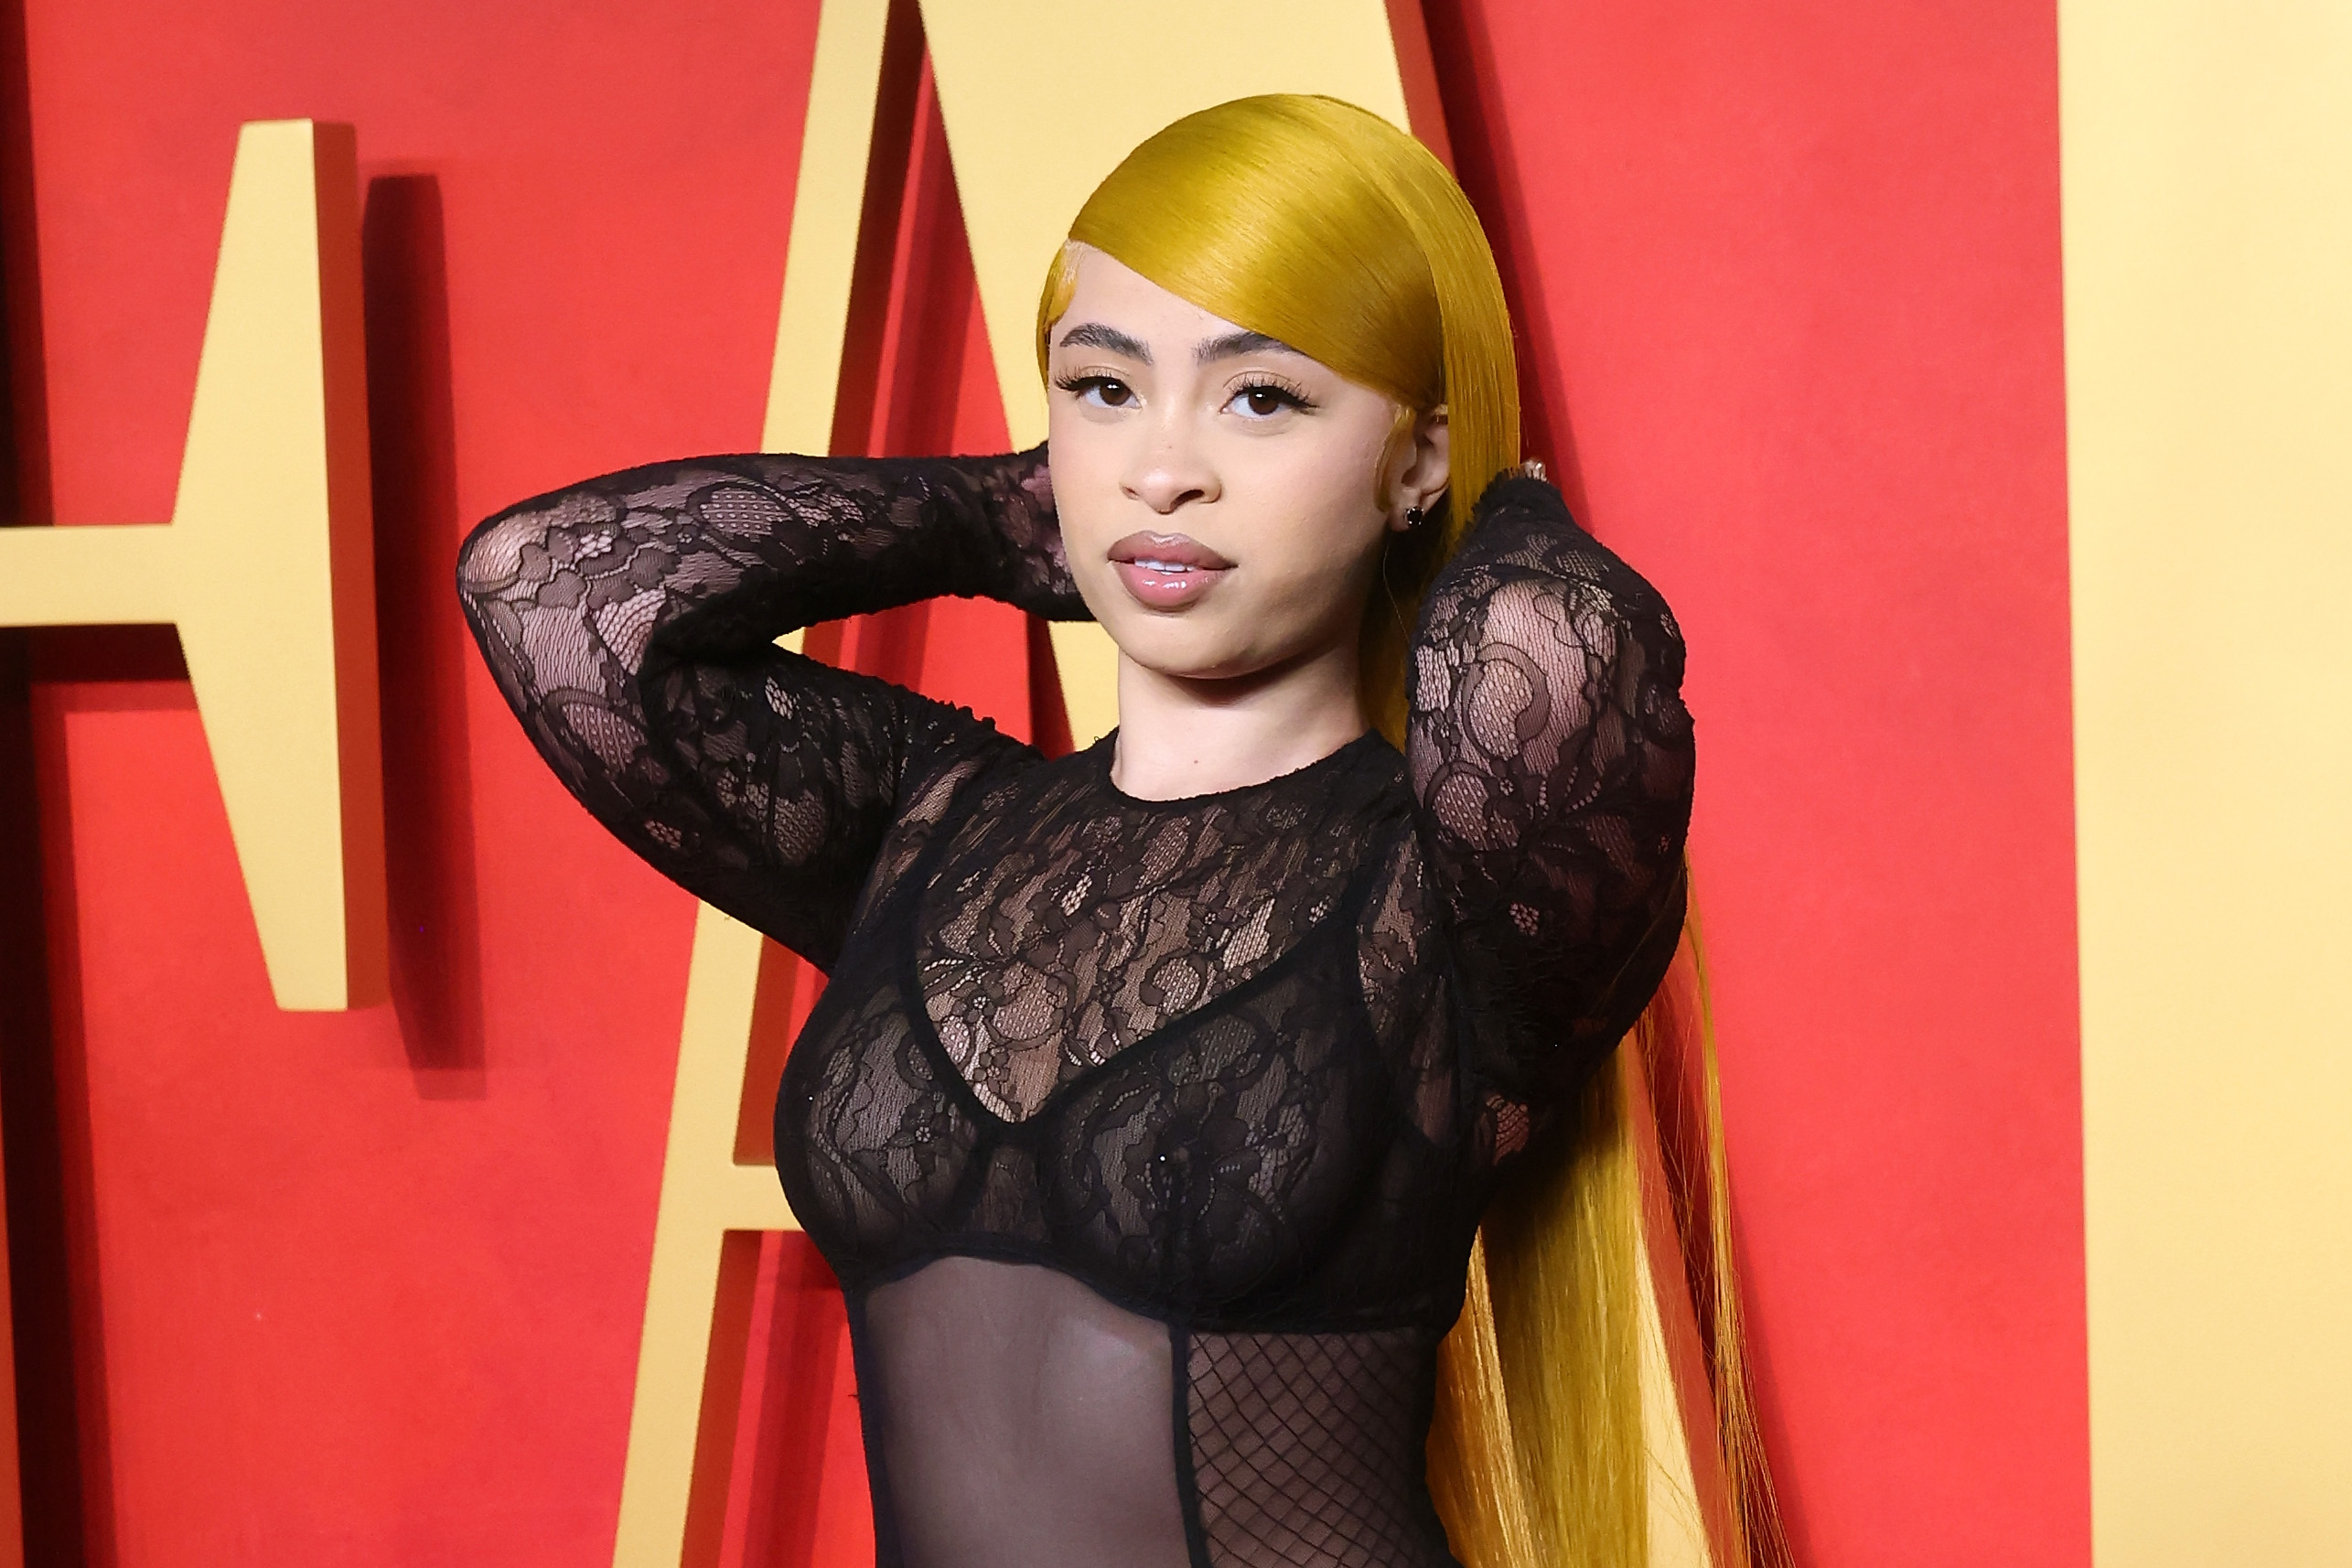 Ice Spice in a sheer lace top and long yellow hair posing on the red carpet